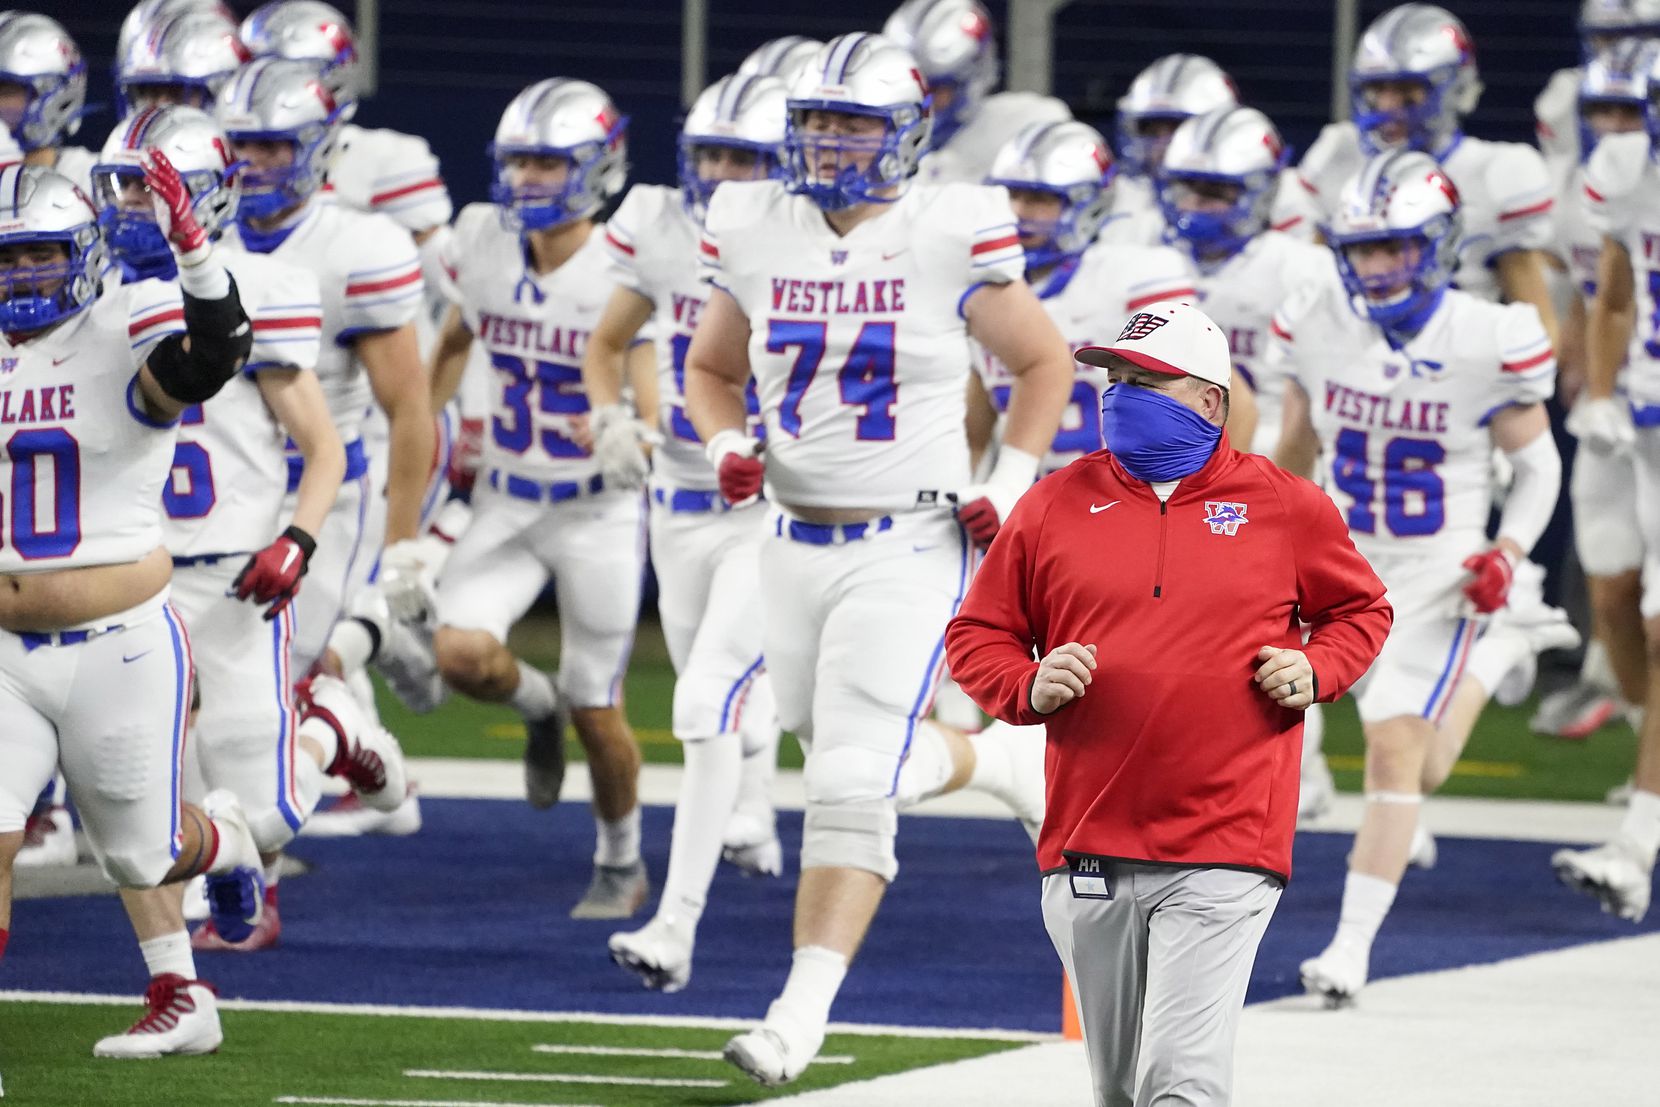 Austin Westlake head coach Todd Dodge takes the field with his team for the Class 6A Division I state football championship game against Southlake Carroll  at AT&T Stadium on Saturday, Jan. 16, 2021, in Arlington, Texas.